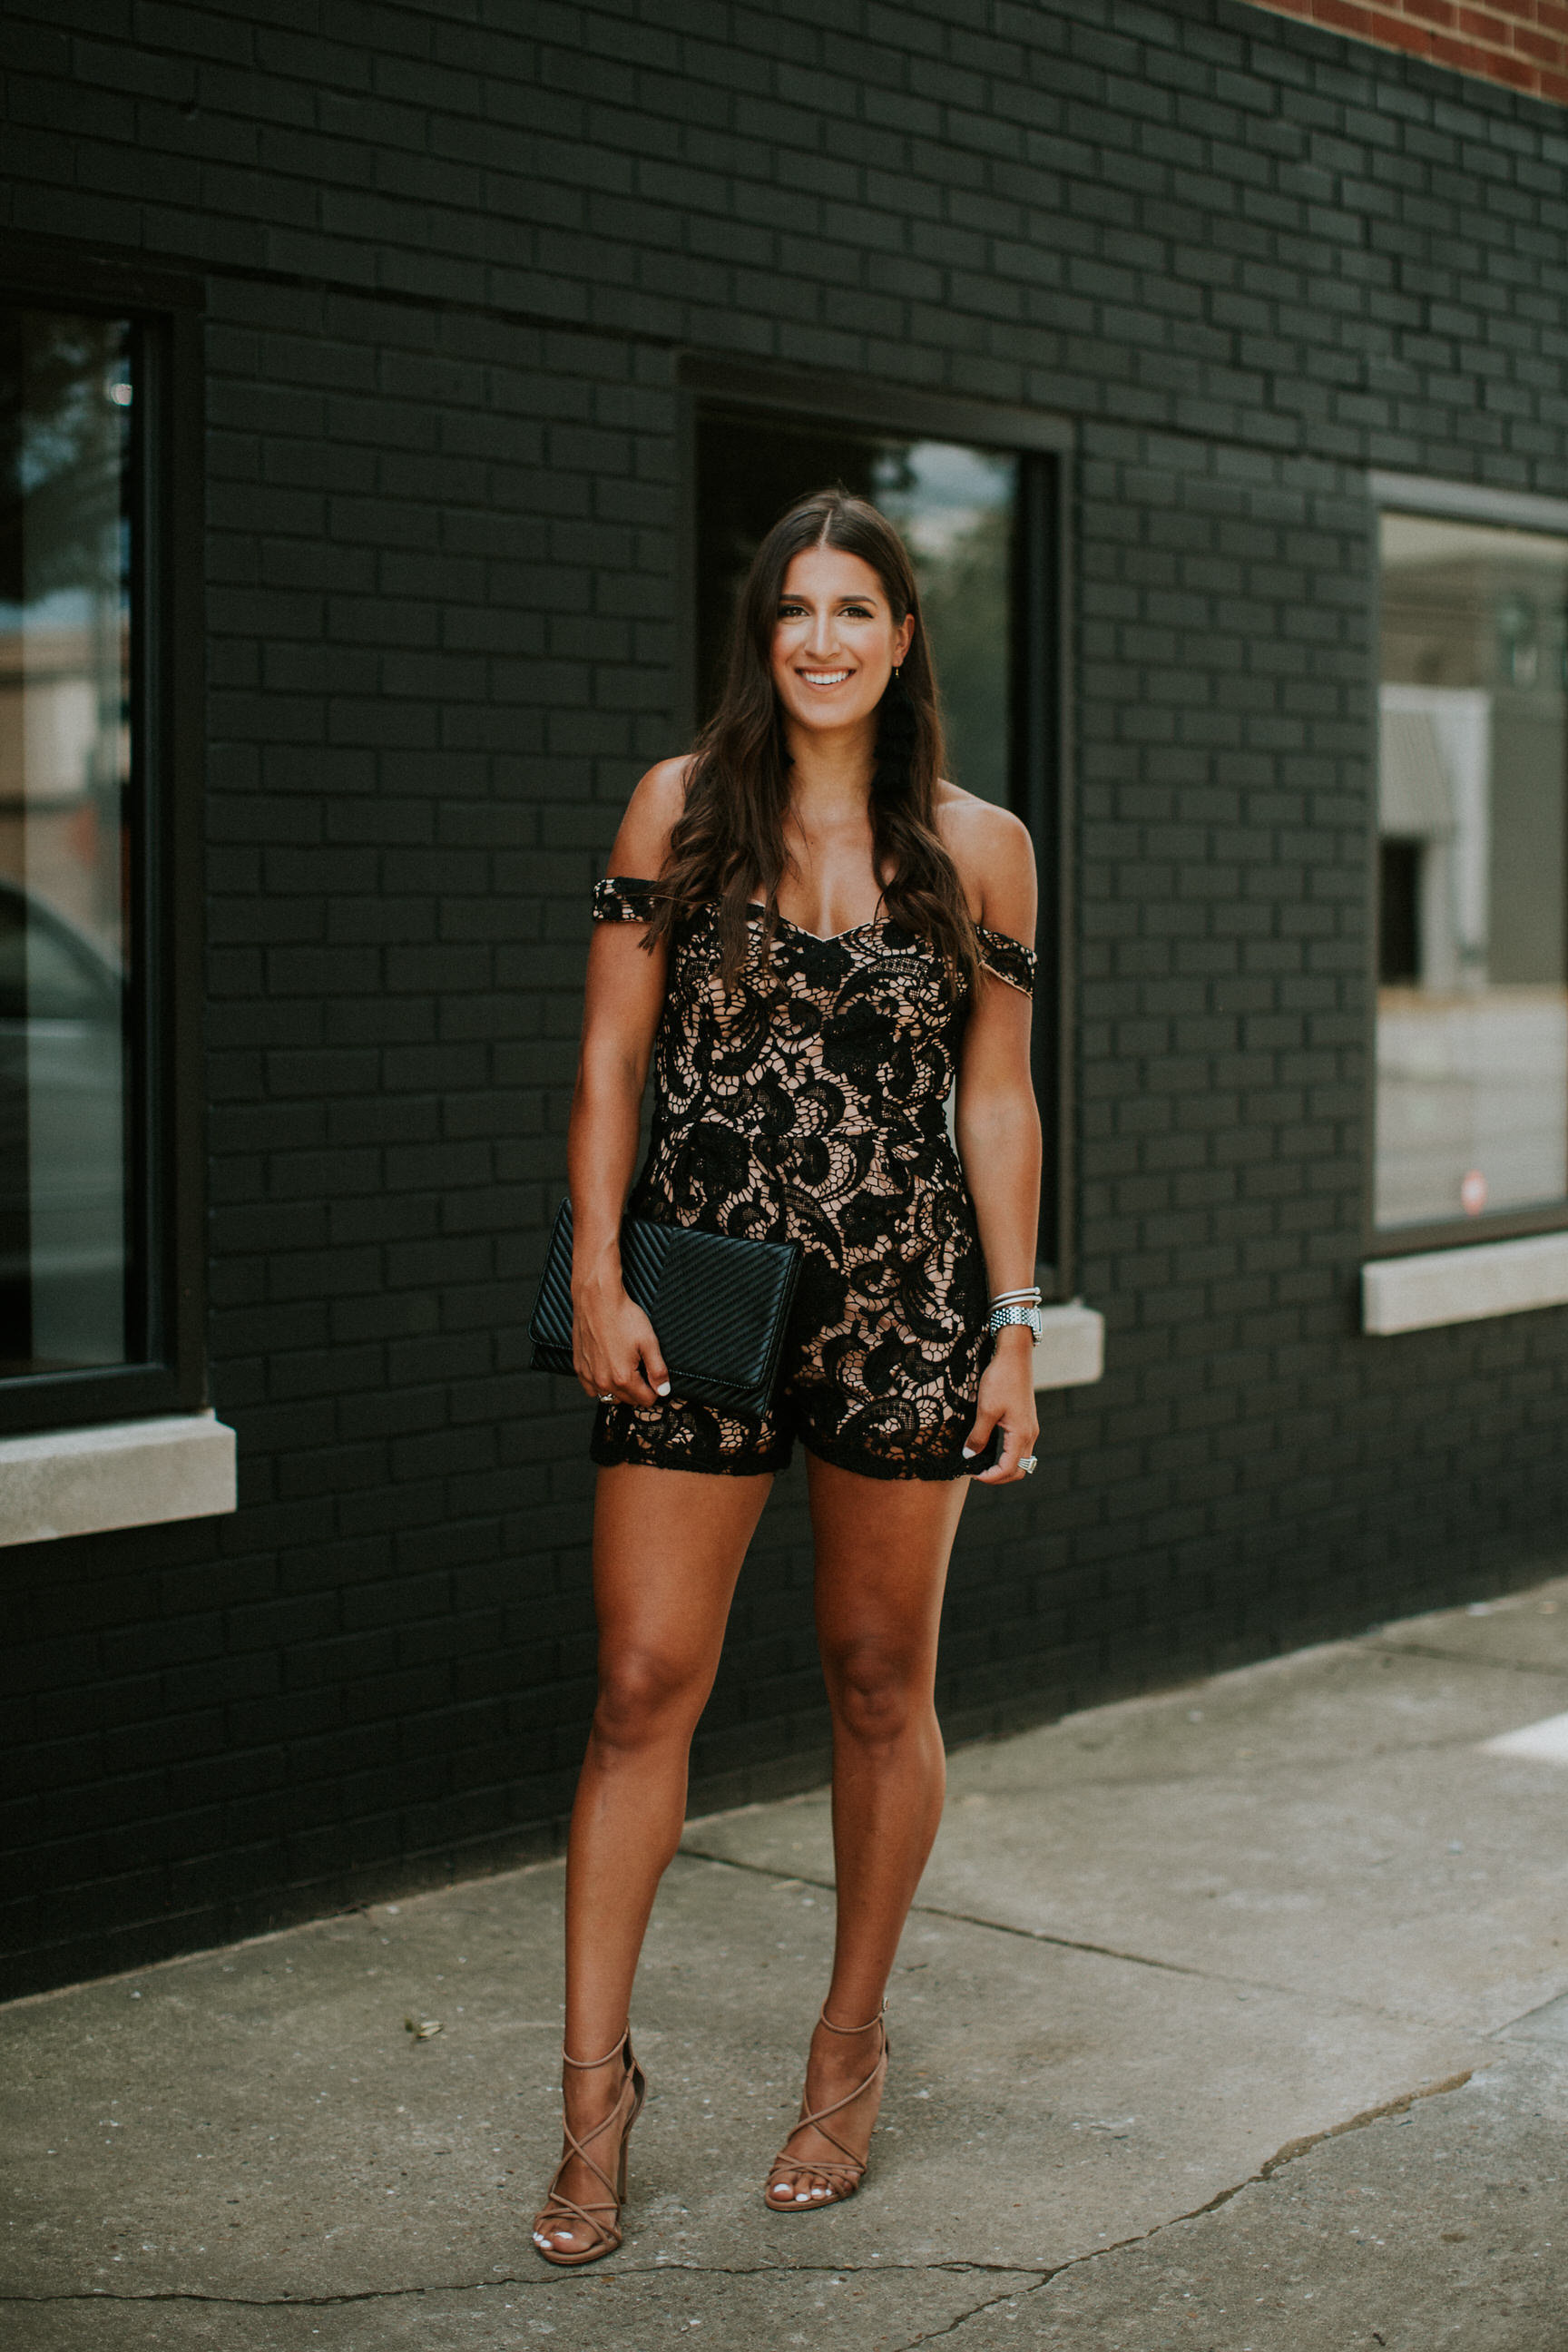 weekend style, tassel outfit, tassel coordinates set, tassel romper, tassel set, nasty gal outfits, nastygal outfits, lace romper, off the shoulder romper, off the shoulder lace romper, black mesh maxi dress, black mesh gown, summer weekend style, summer style, summer fashion // grace wainwright a southern drawl